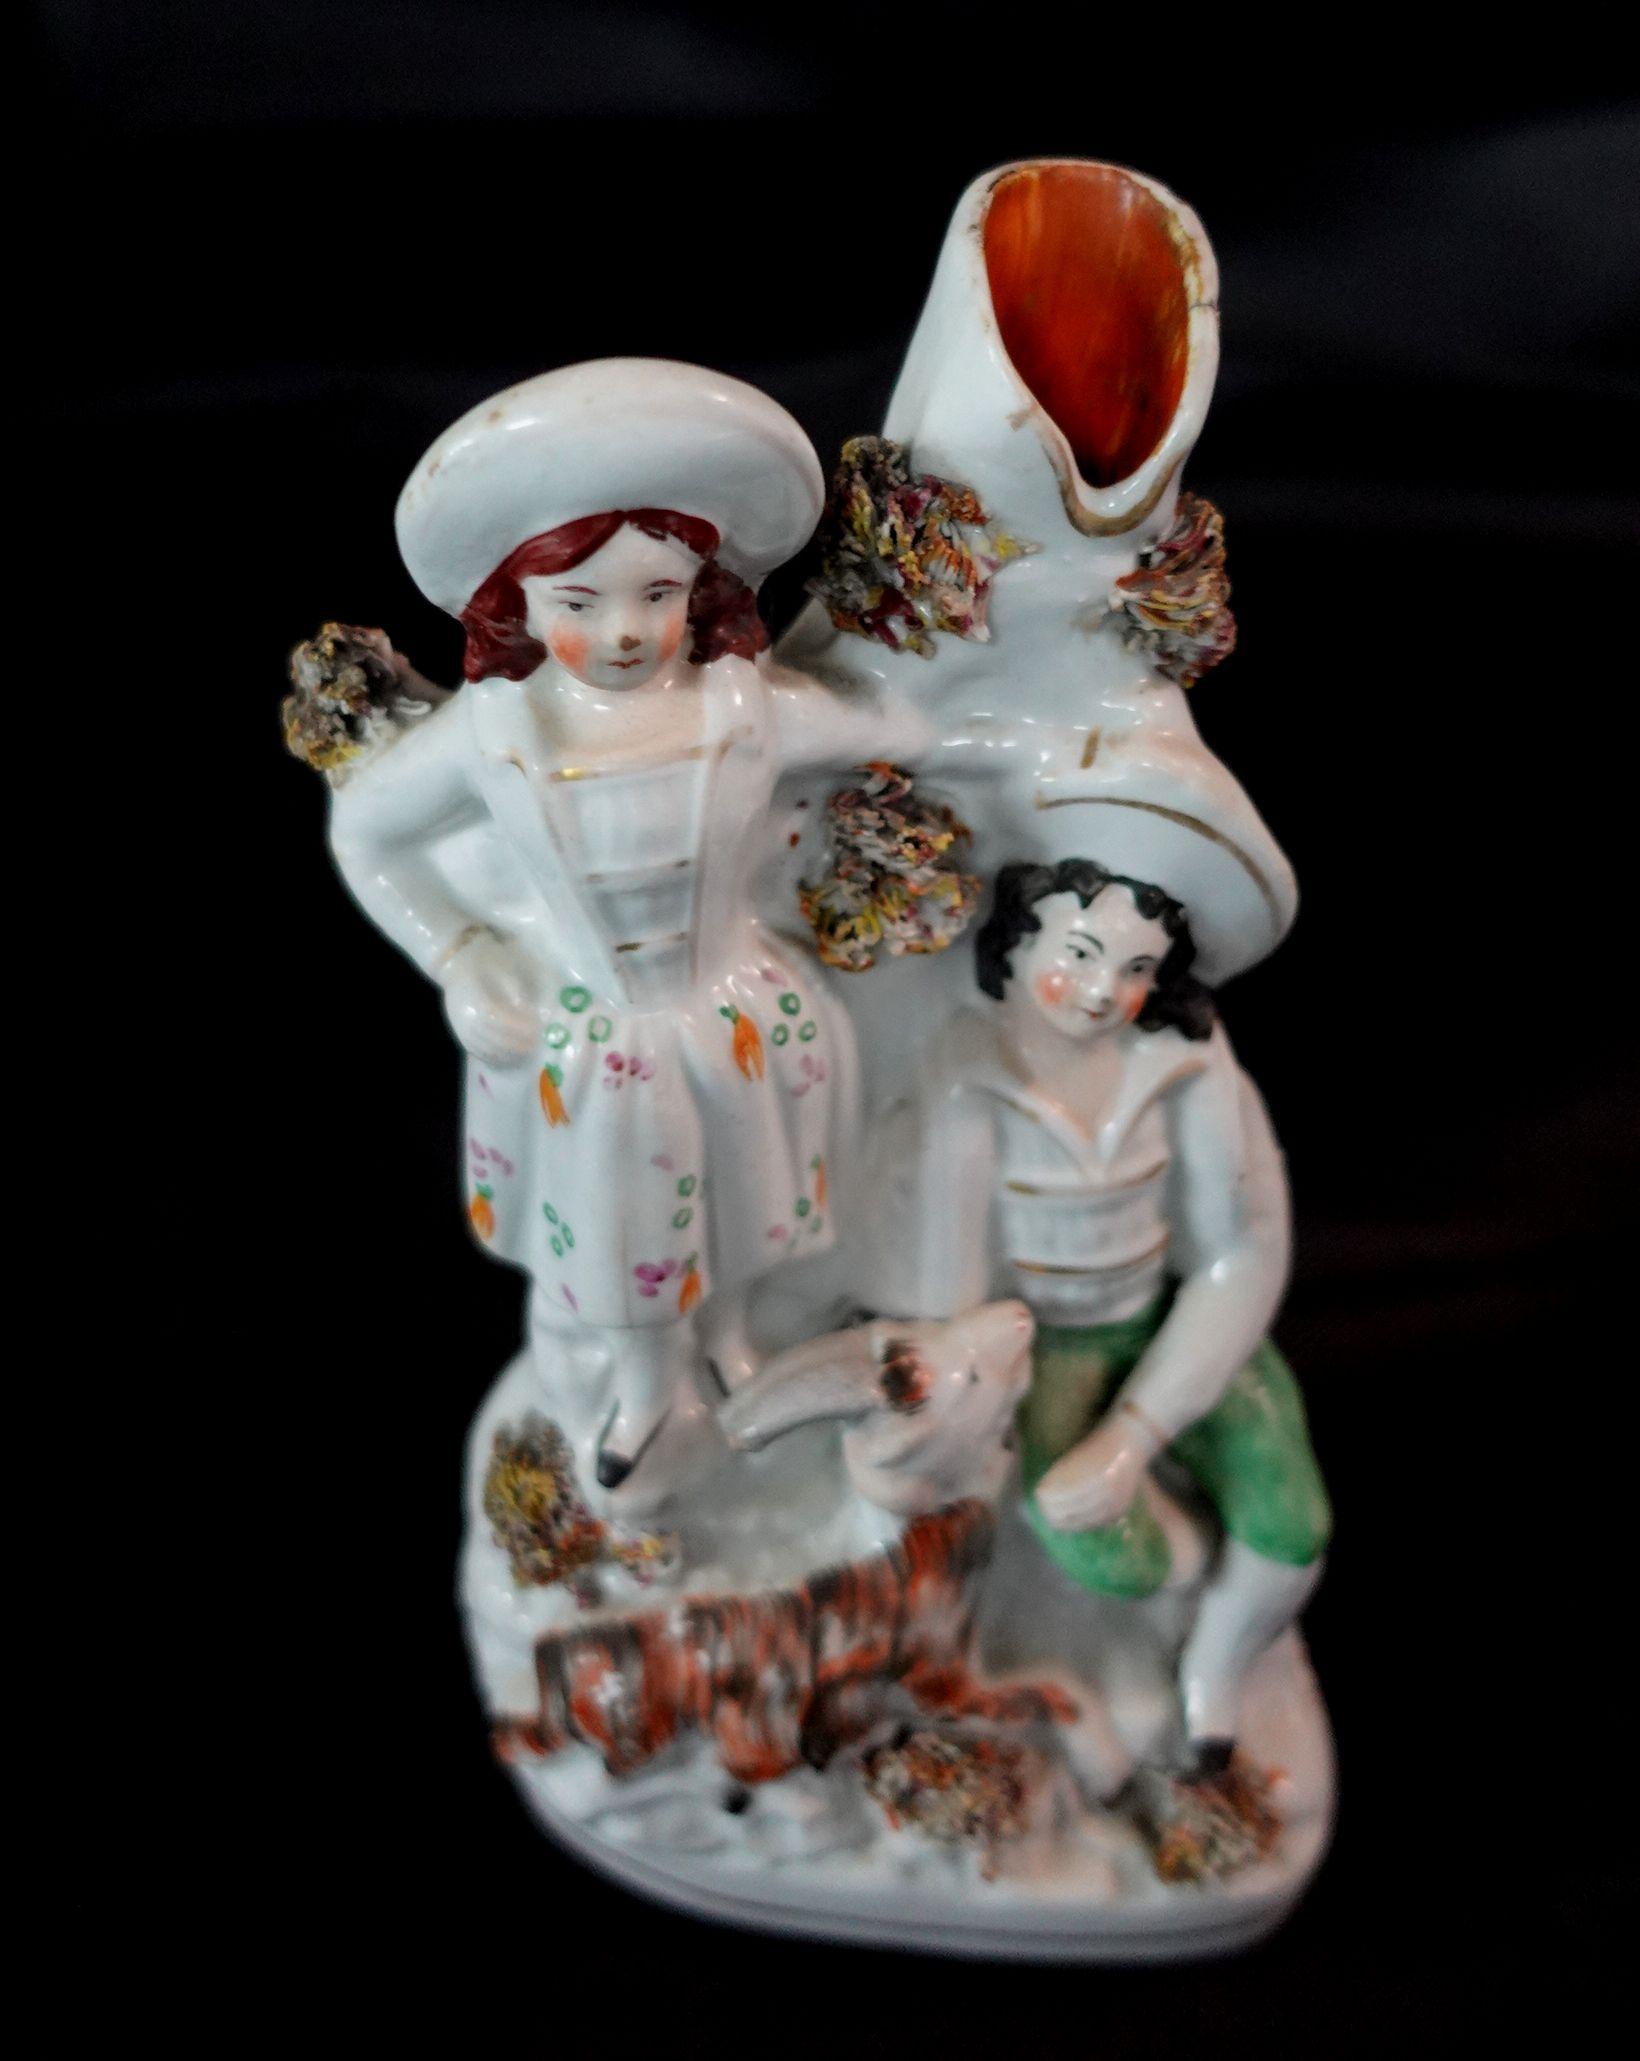 Hand-Crafted 19th Century Staffordshire Figure #4 For Sale